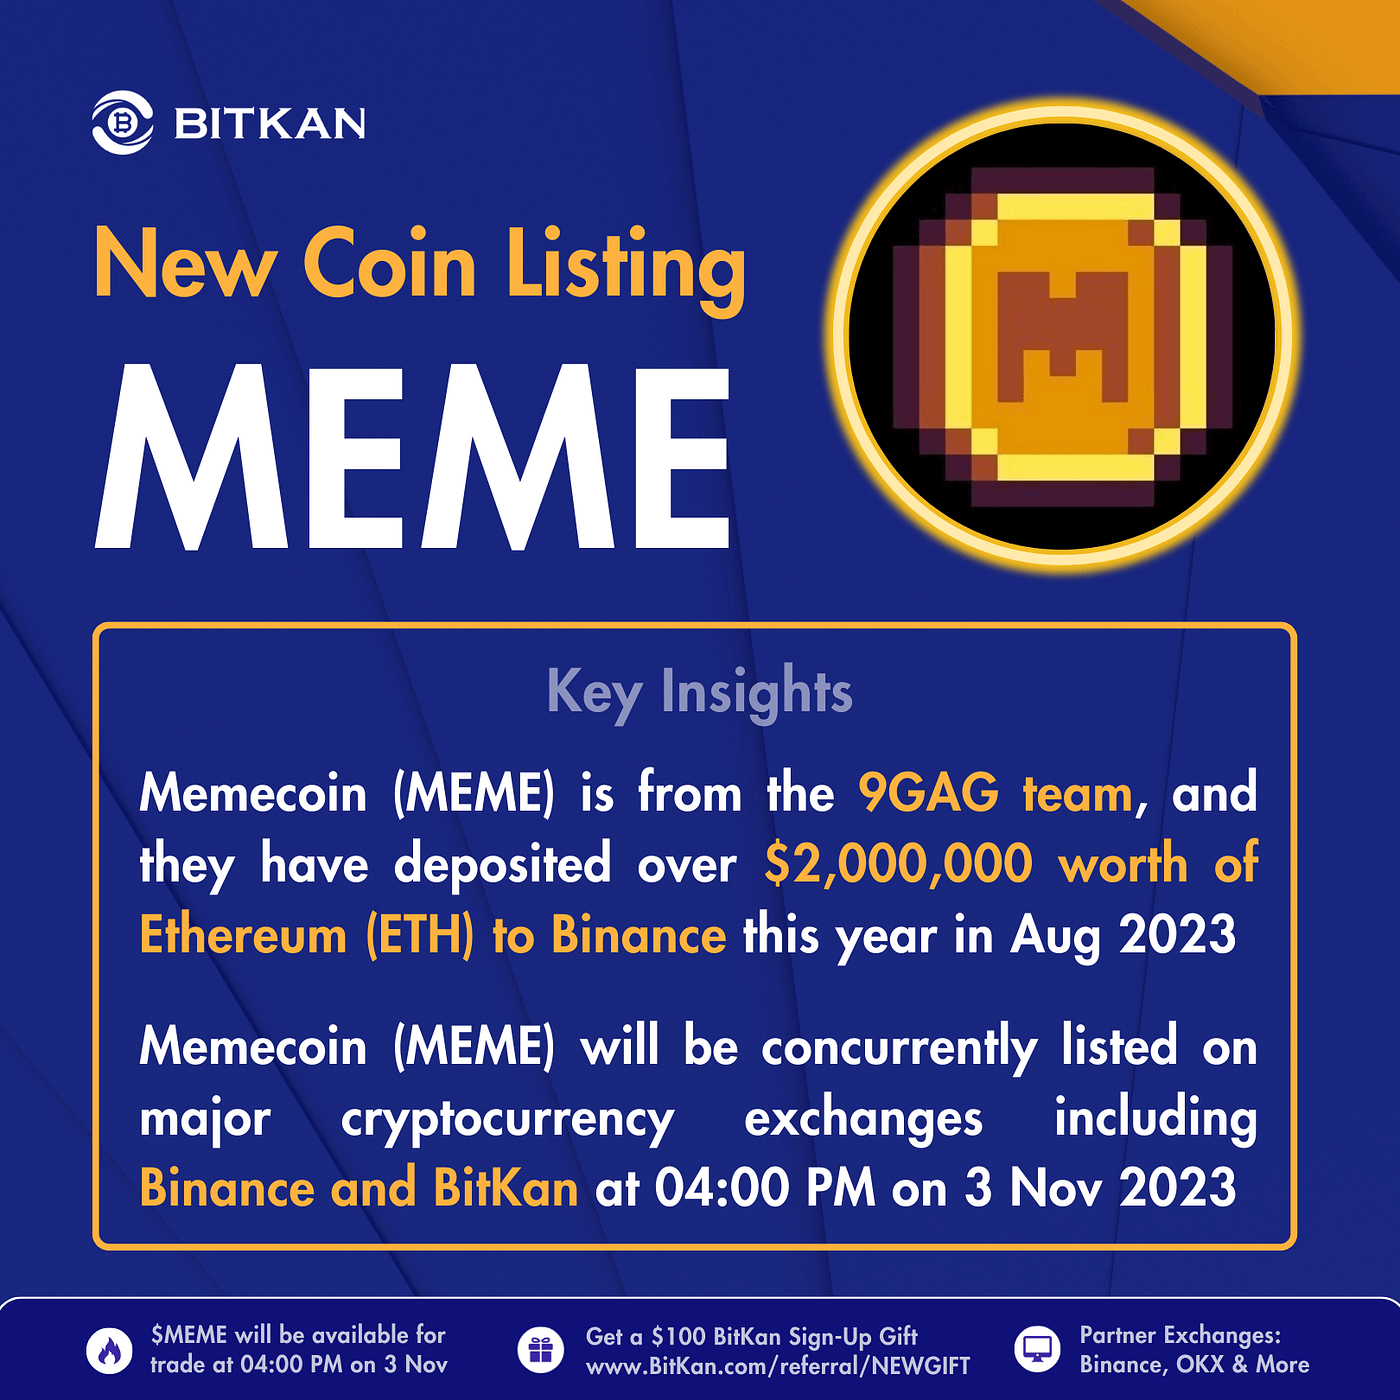 How to trade meme coins